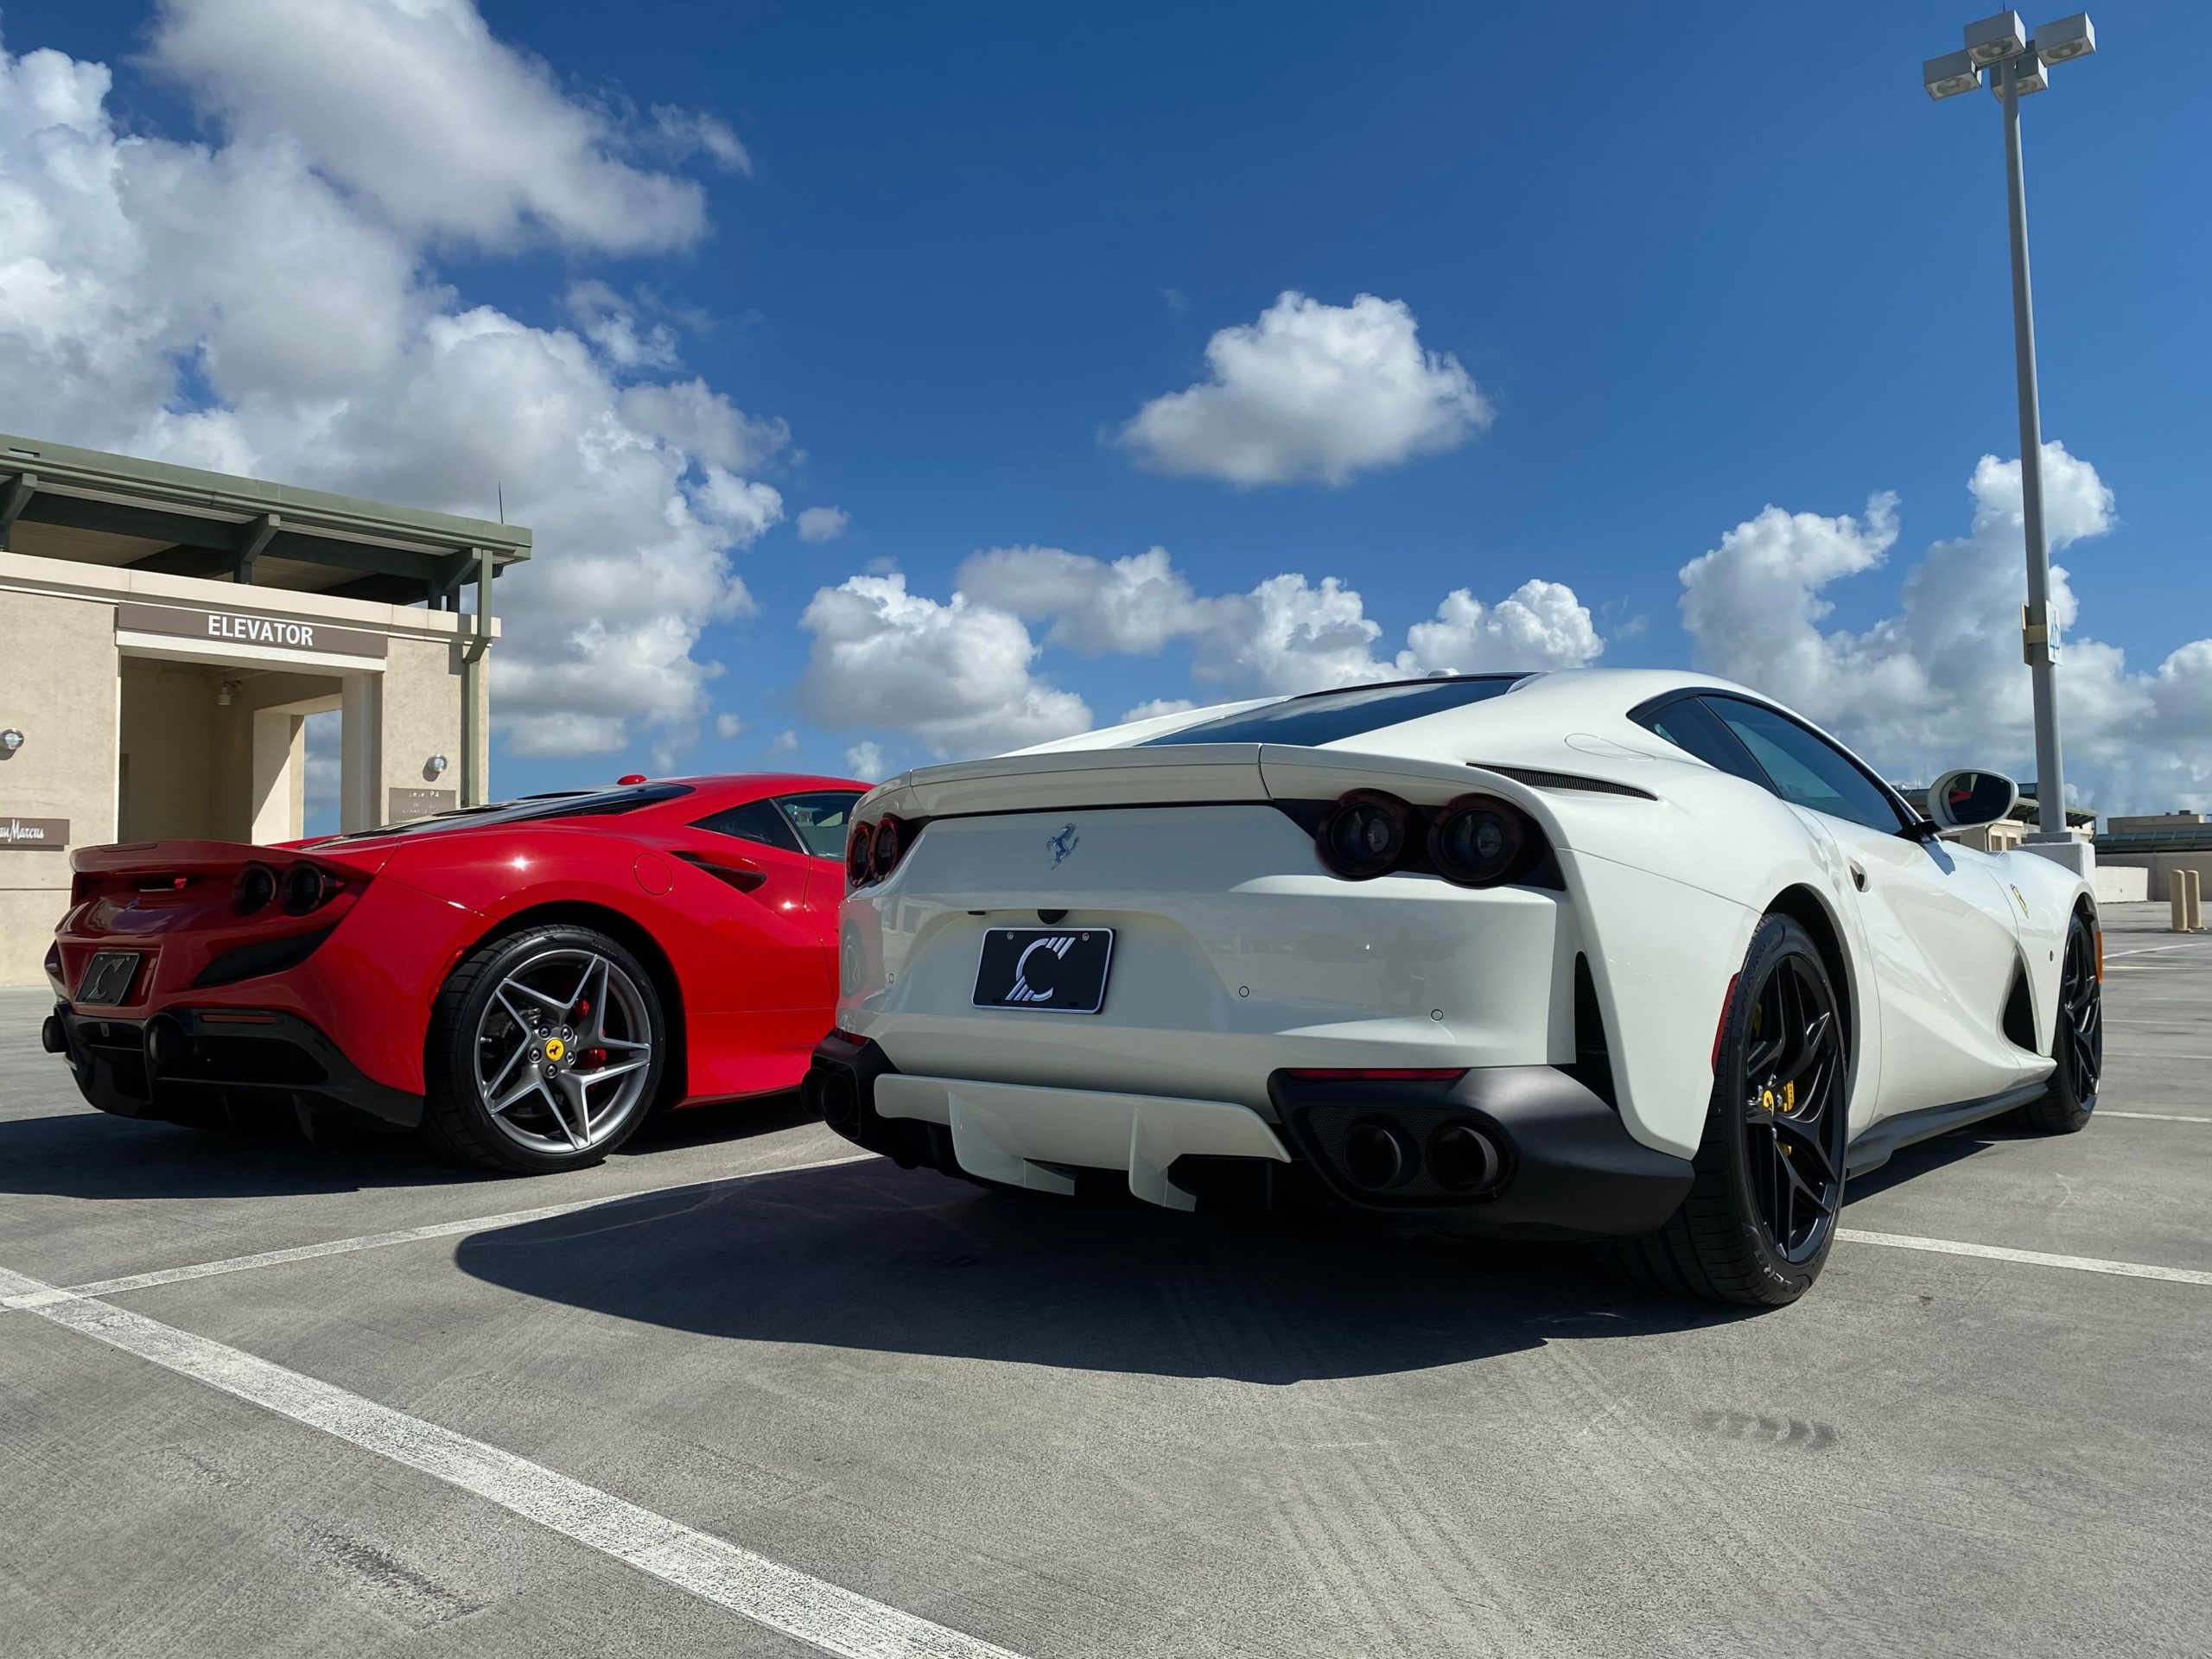 2020 F8 Tributo and 2019 812 Superfast